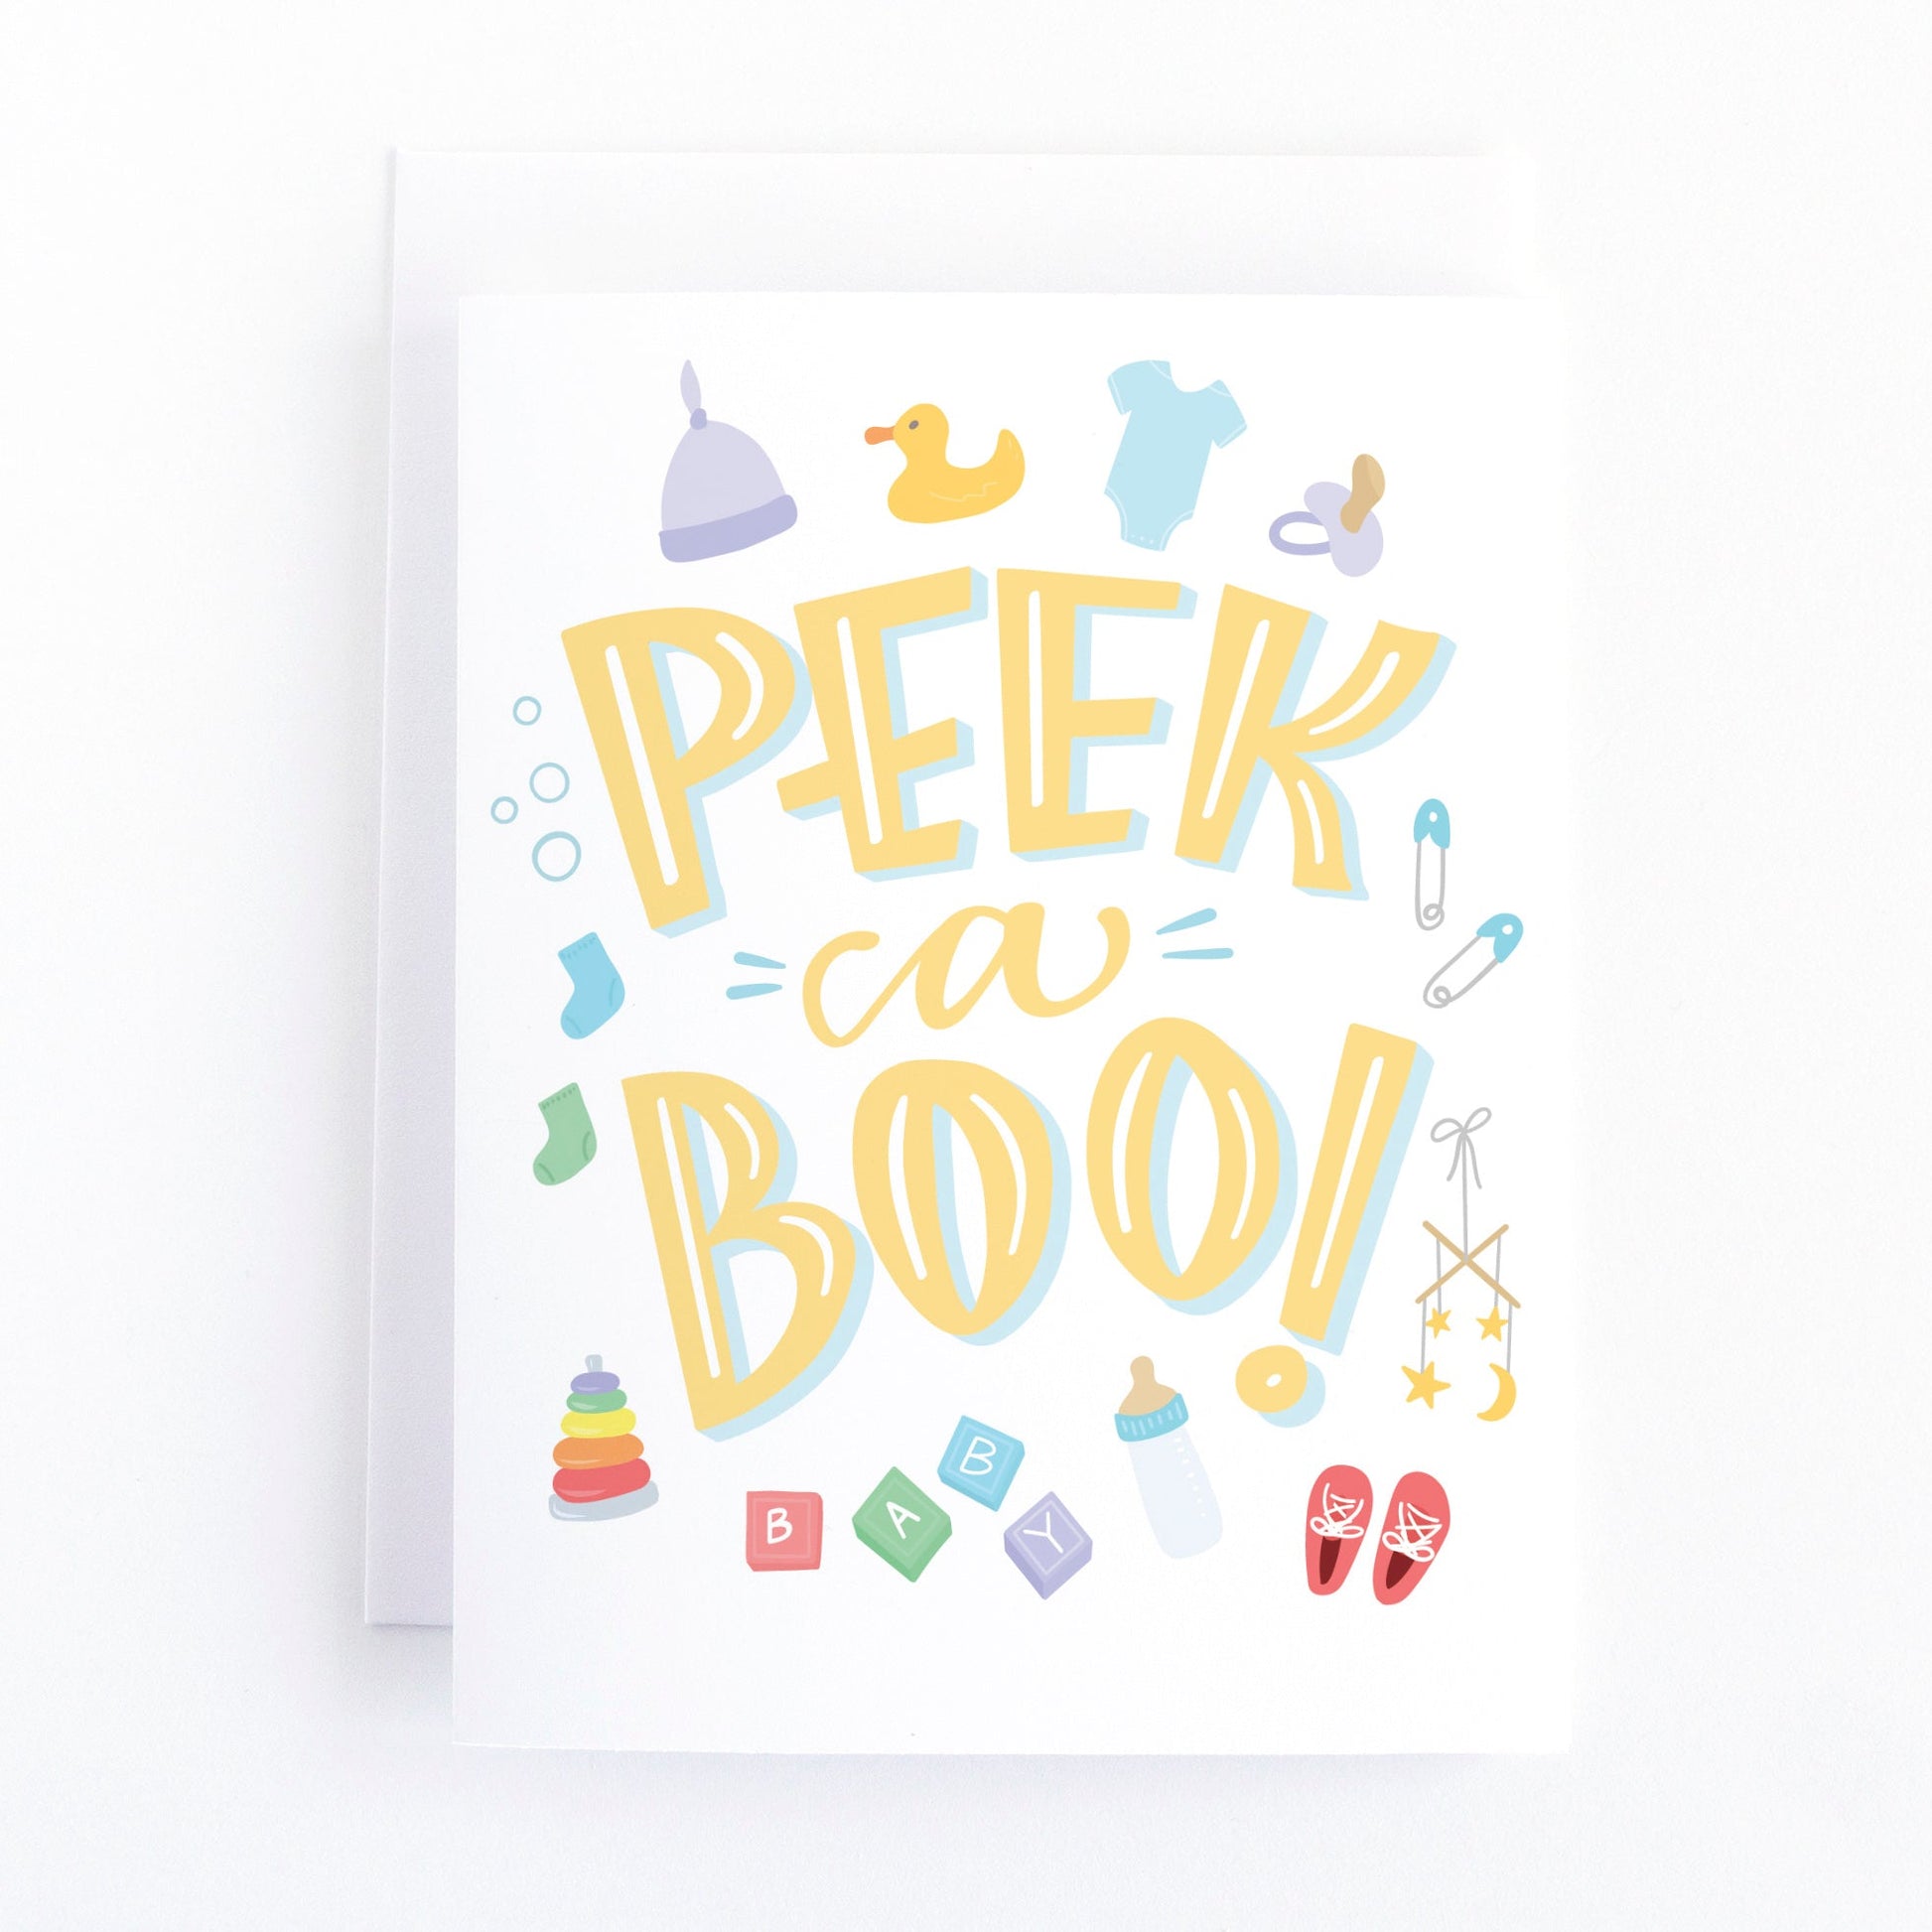 Baby Shower Card featuring the message, Peek a boo! with baby layette and nursery items illustrated in soft pastels